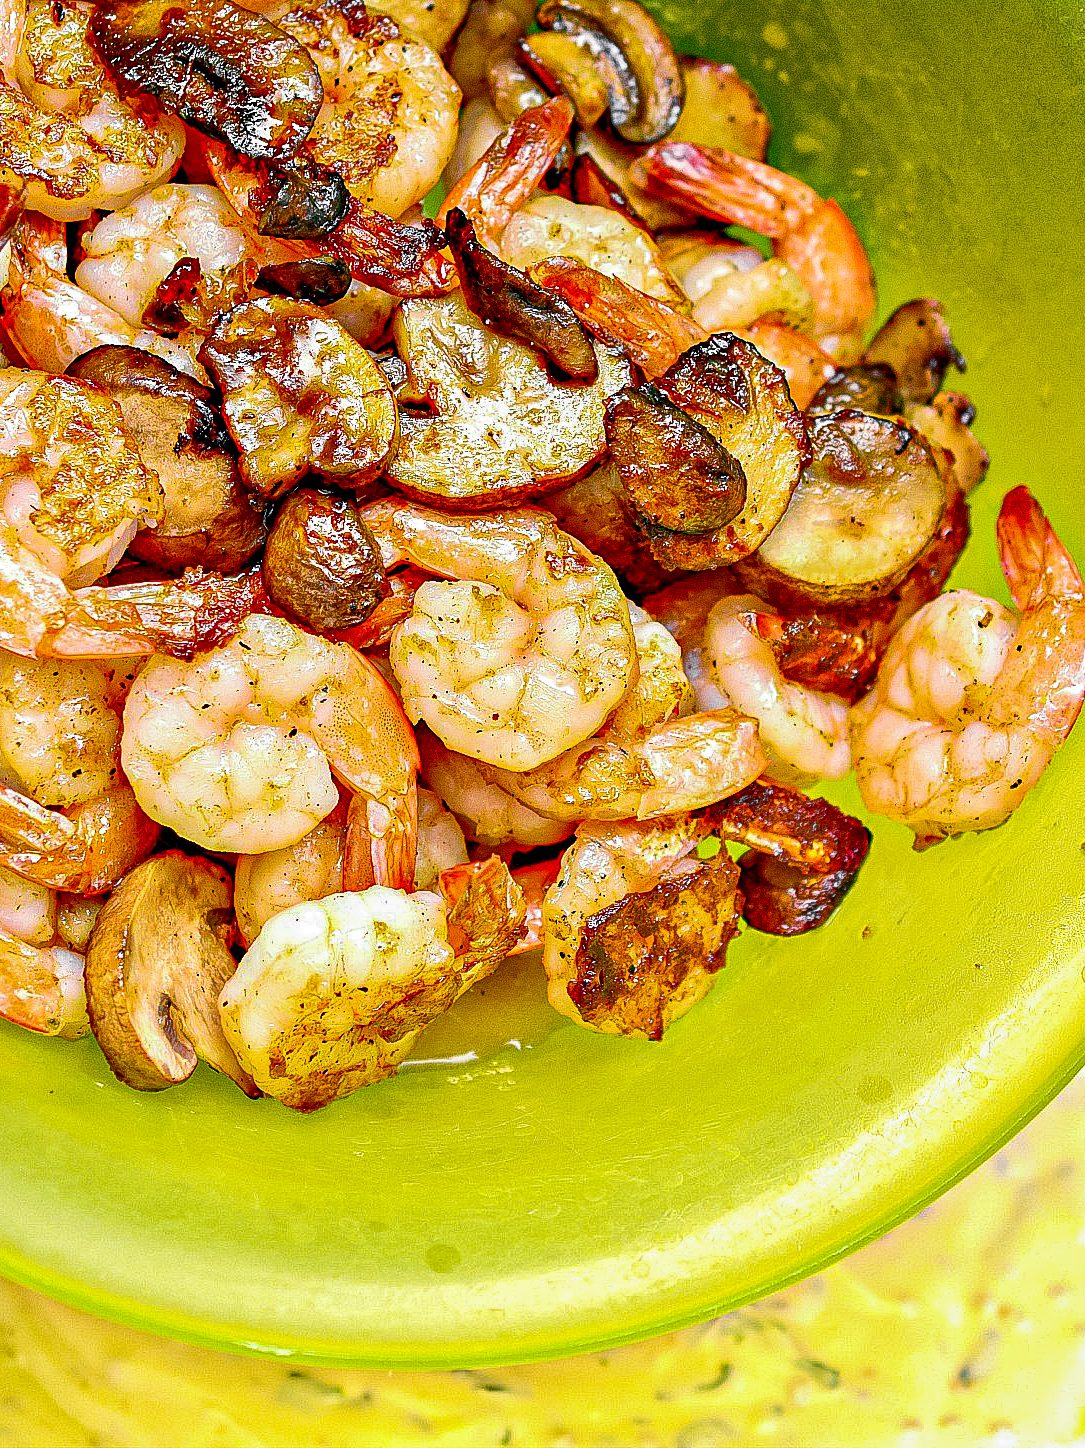 Add the shrimp and mushrooms to the skillet, stirring to coat well in the sauce.